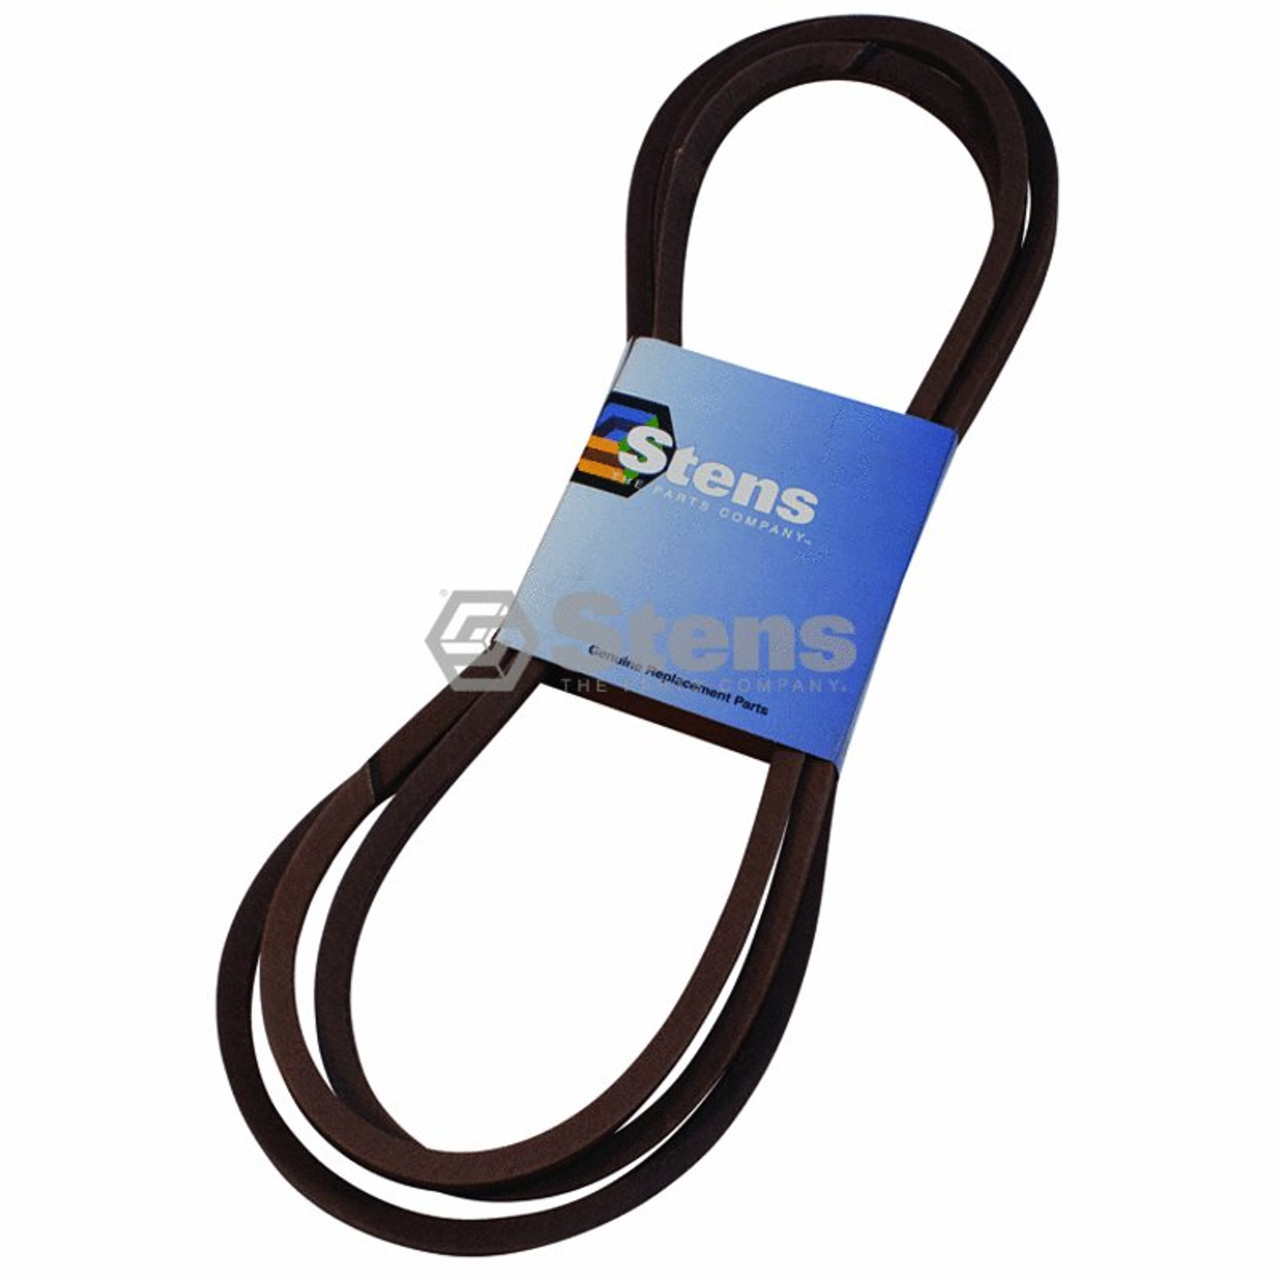 Stens 265-624 OEM Replacement Belt/Cub Cadet 954-04145A by Stens 